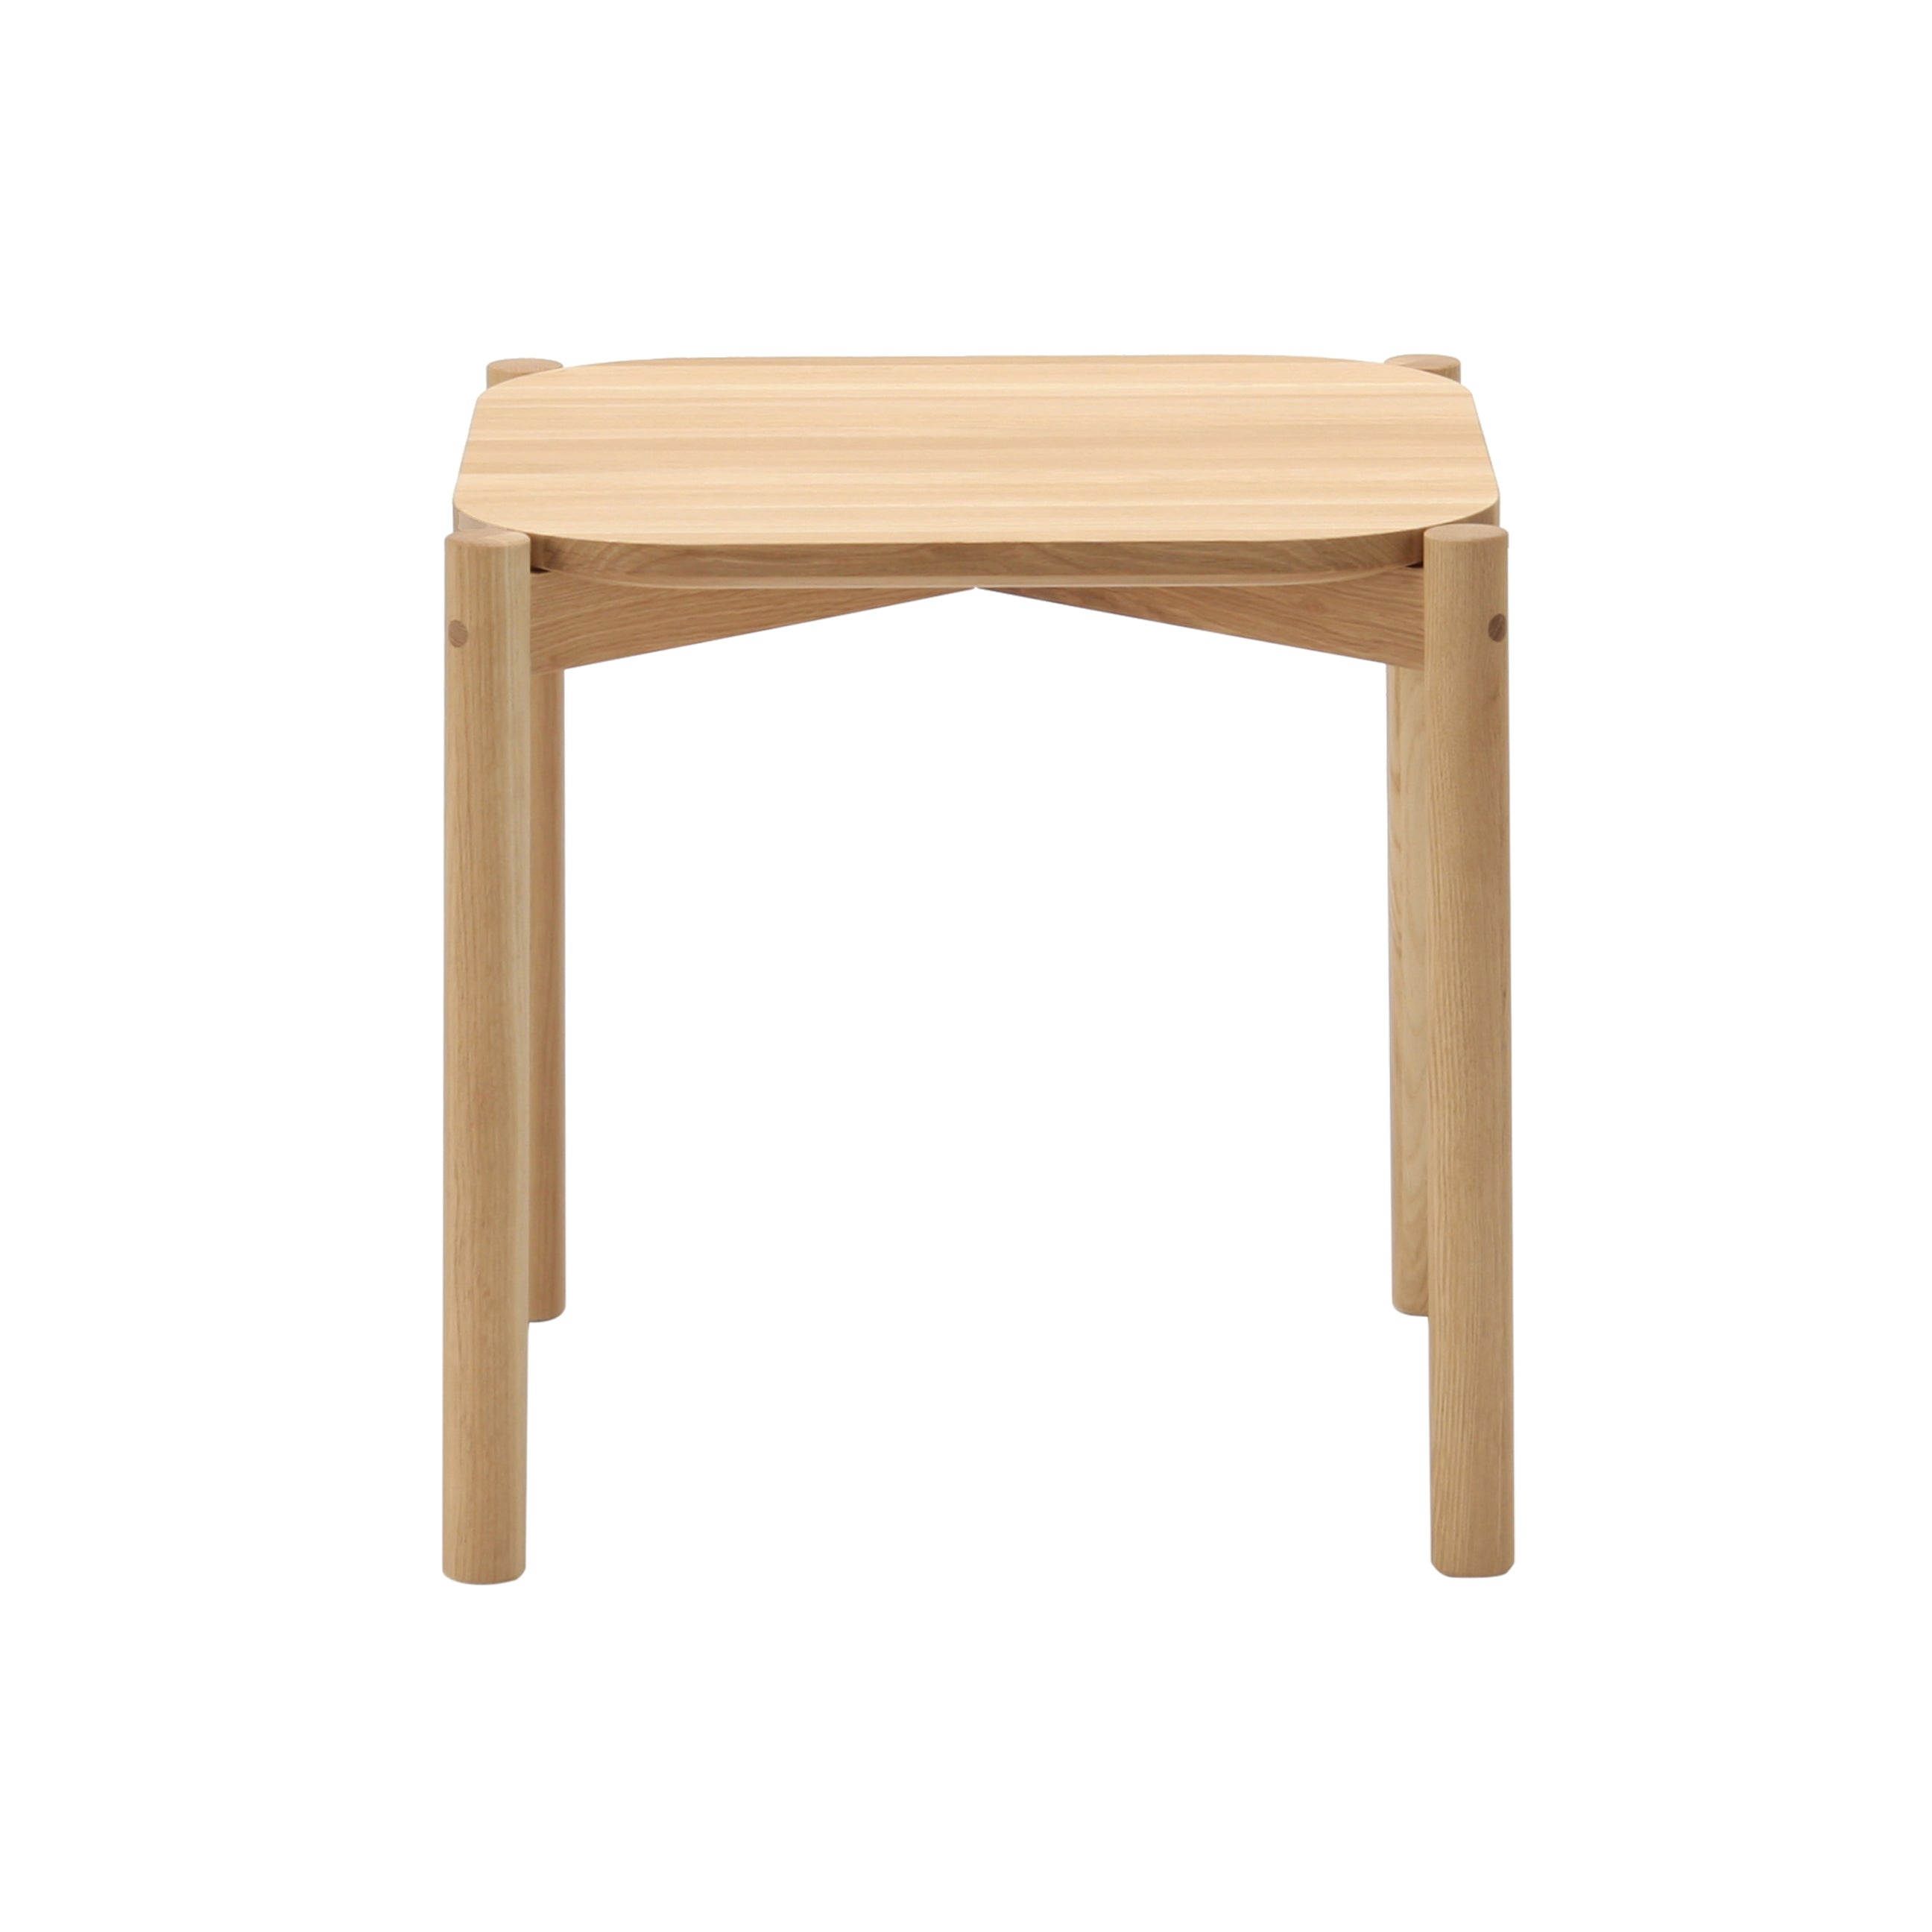 Castor Low Table: Small - 19.7